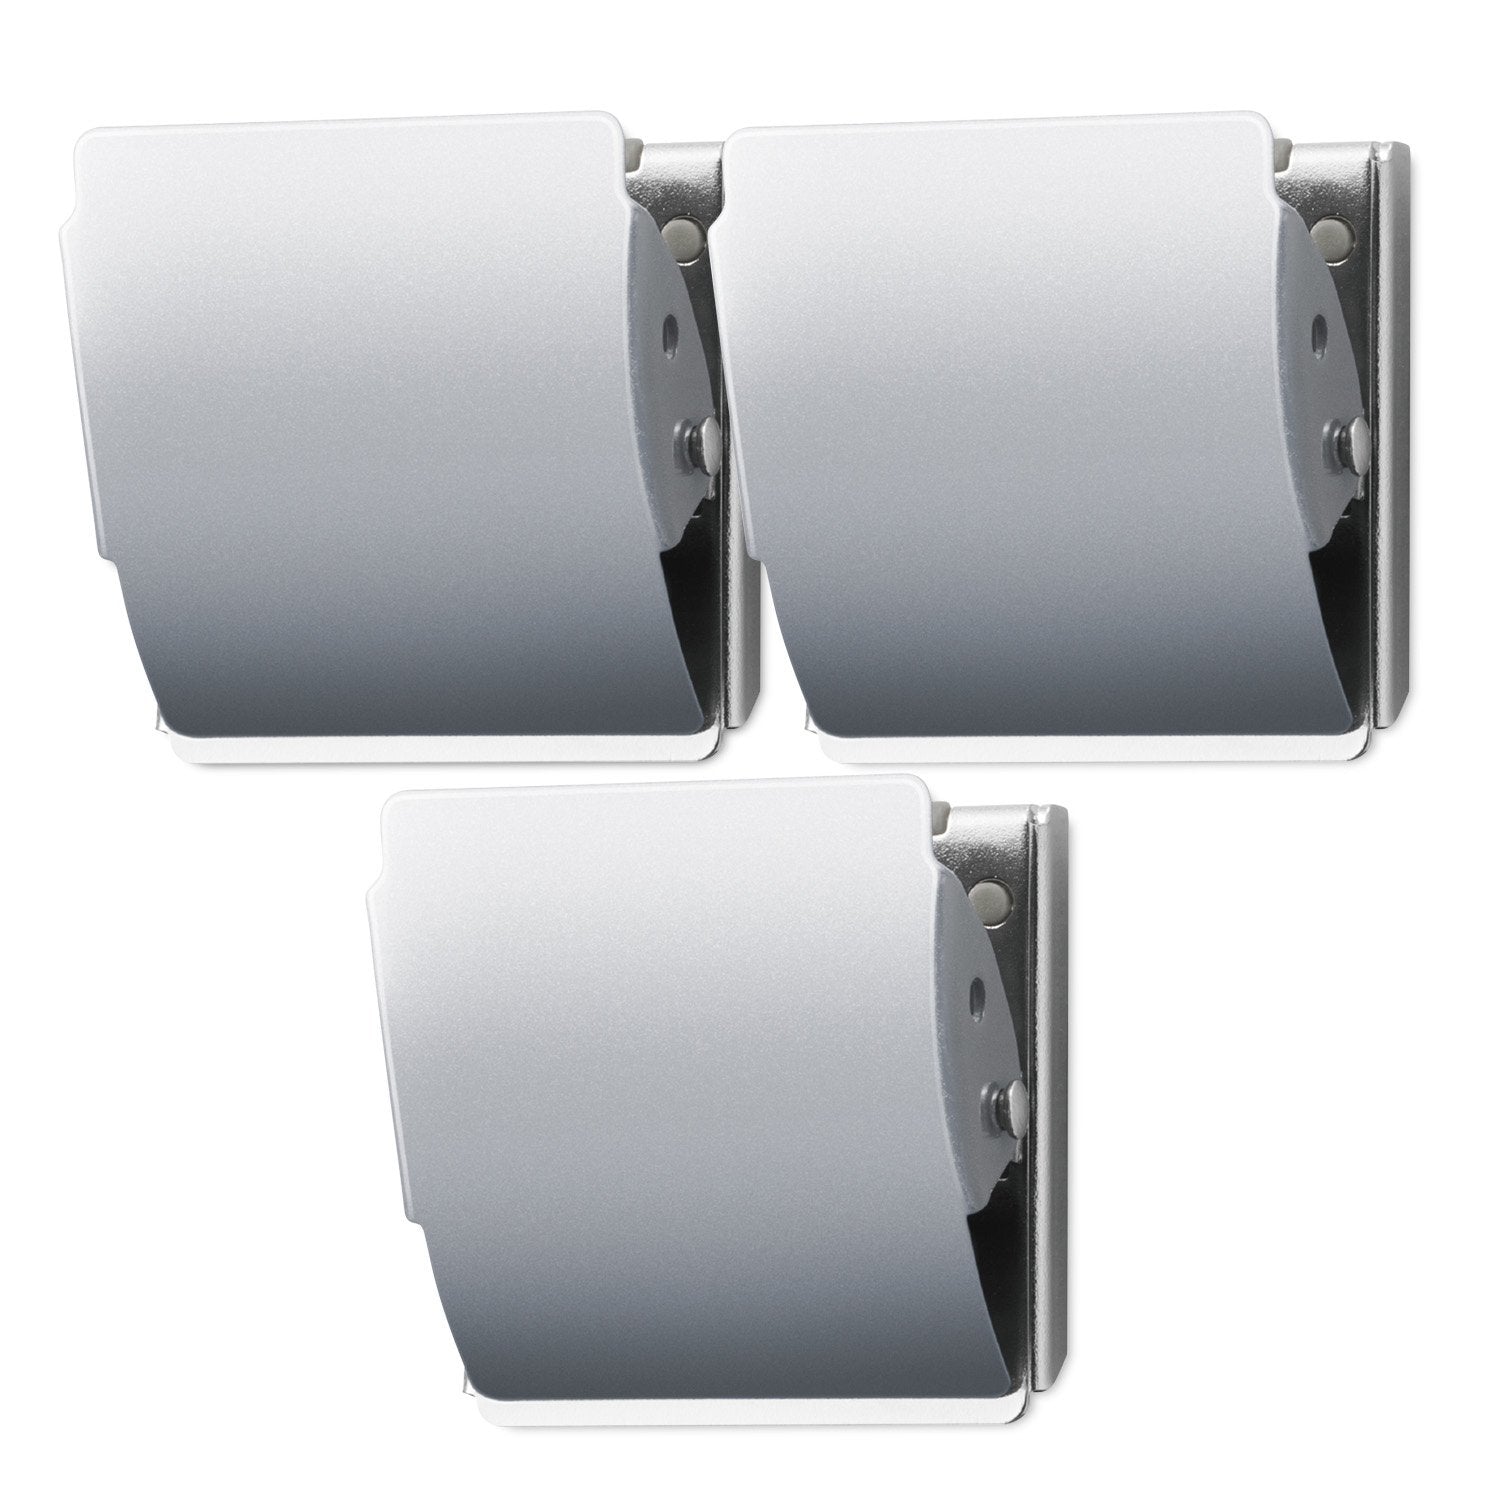 PLUS Extra Strong Magnetic Clip LARGE Silver - 3 Pack